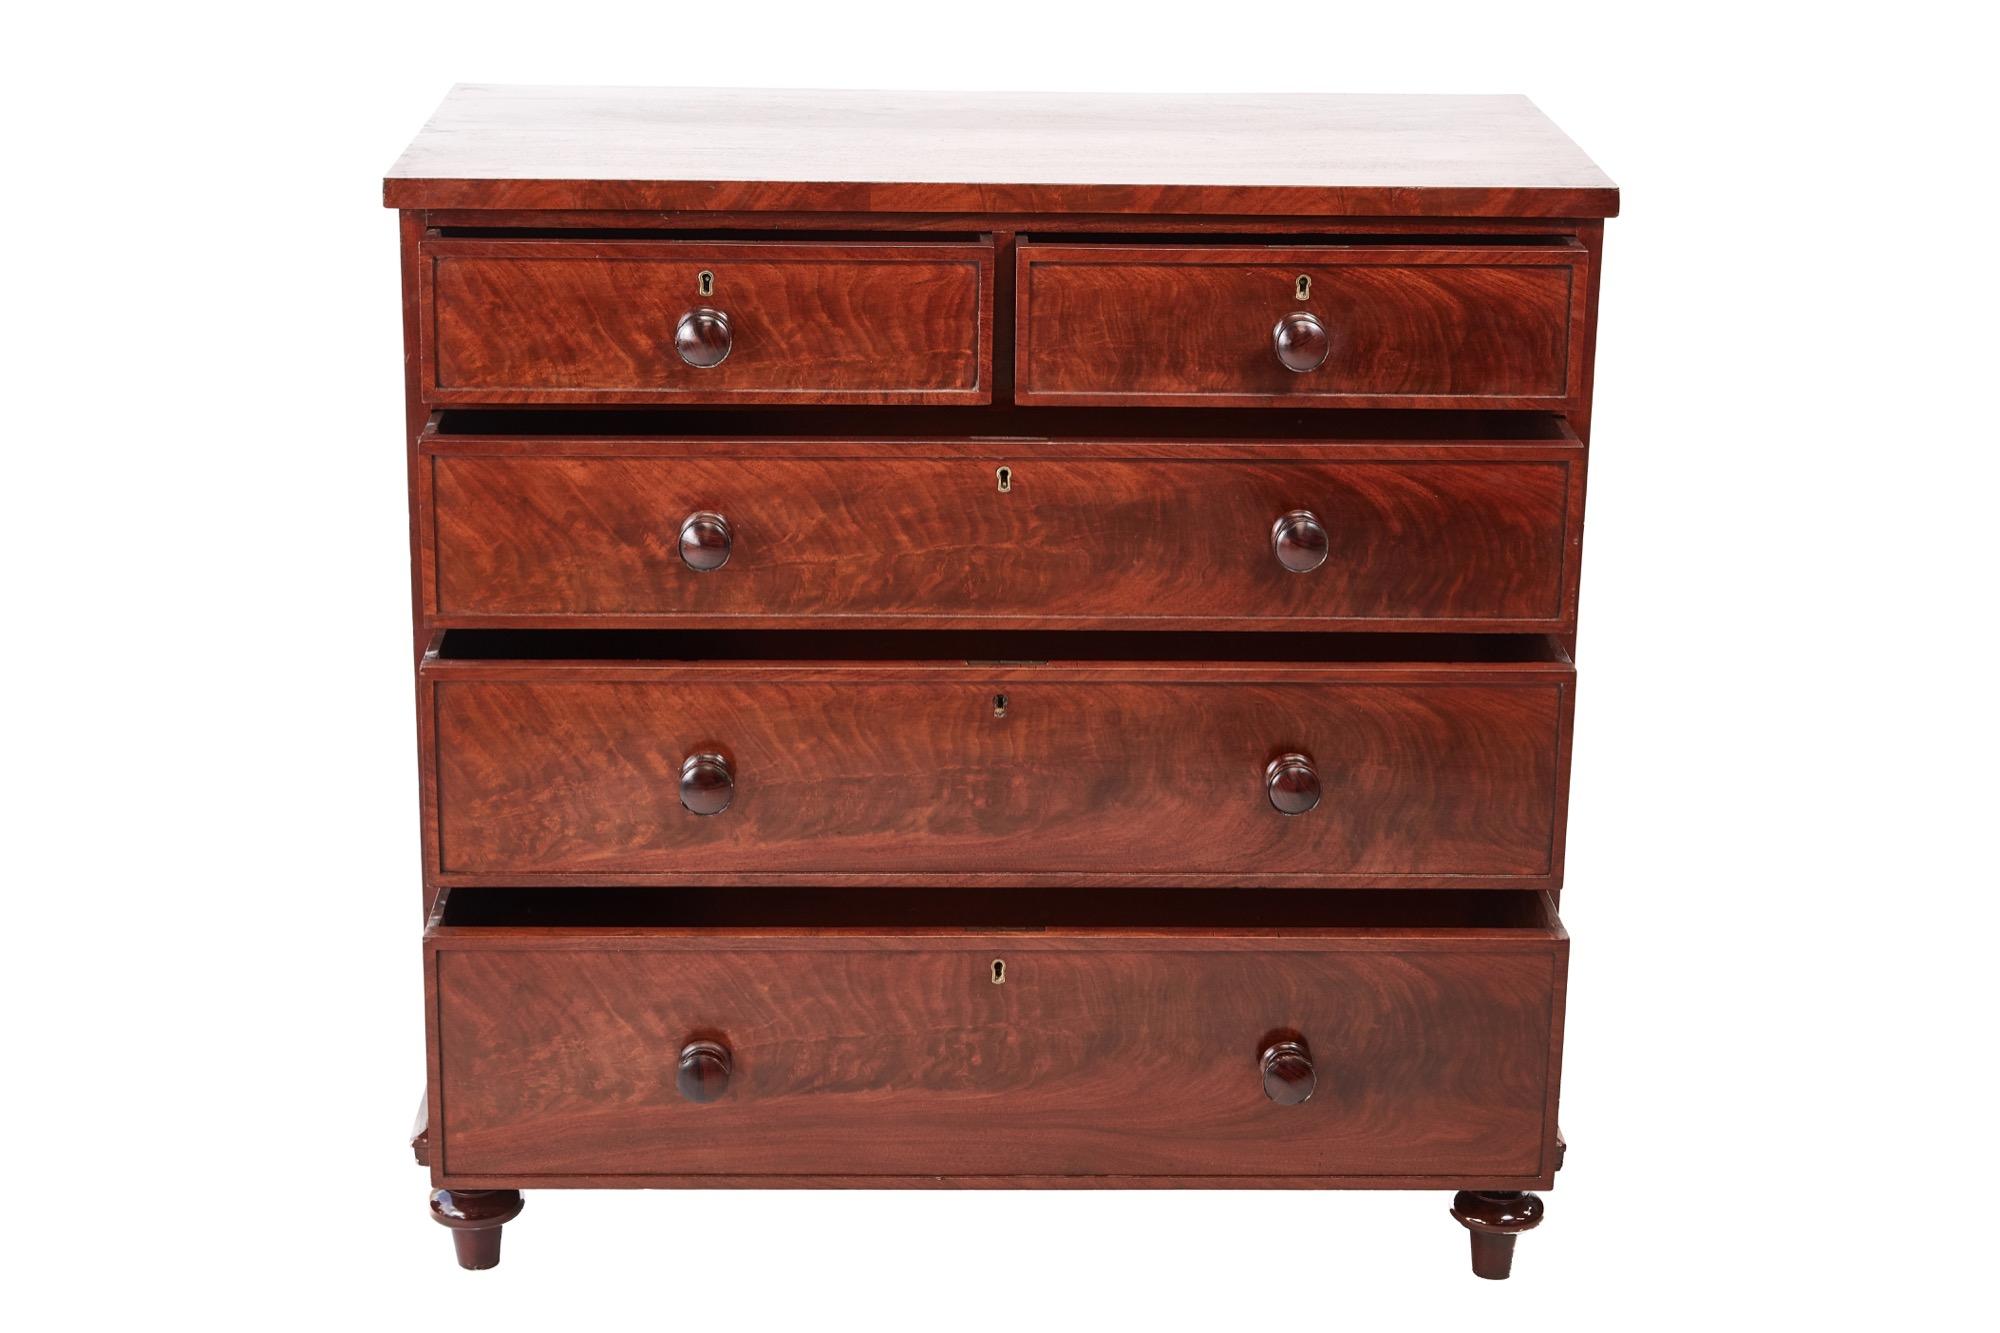 This is a quality 19th century Victorian antique mahogany chest of drawers with a fantastic mahogany top. It has 2 short and 3 long drawers with original turned mahogany knob and moulded drawers fronts. It stands on original turned